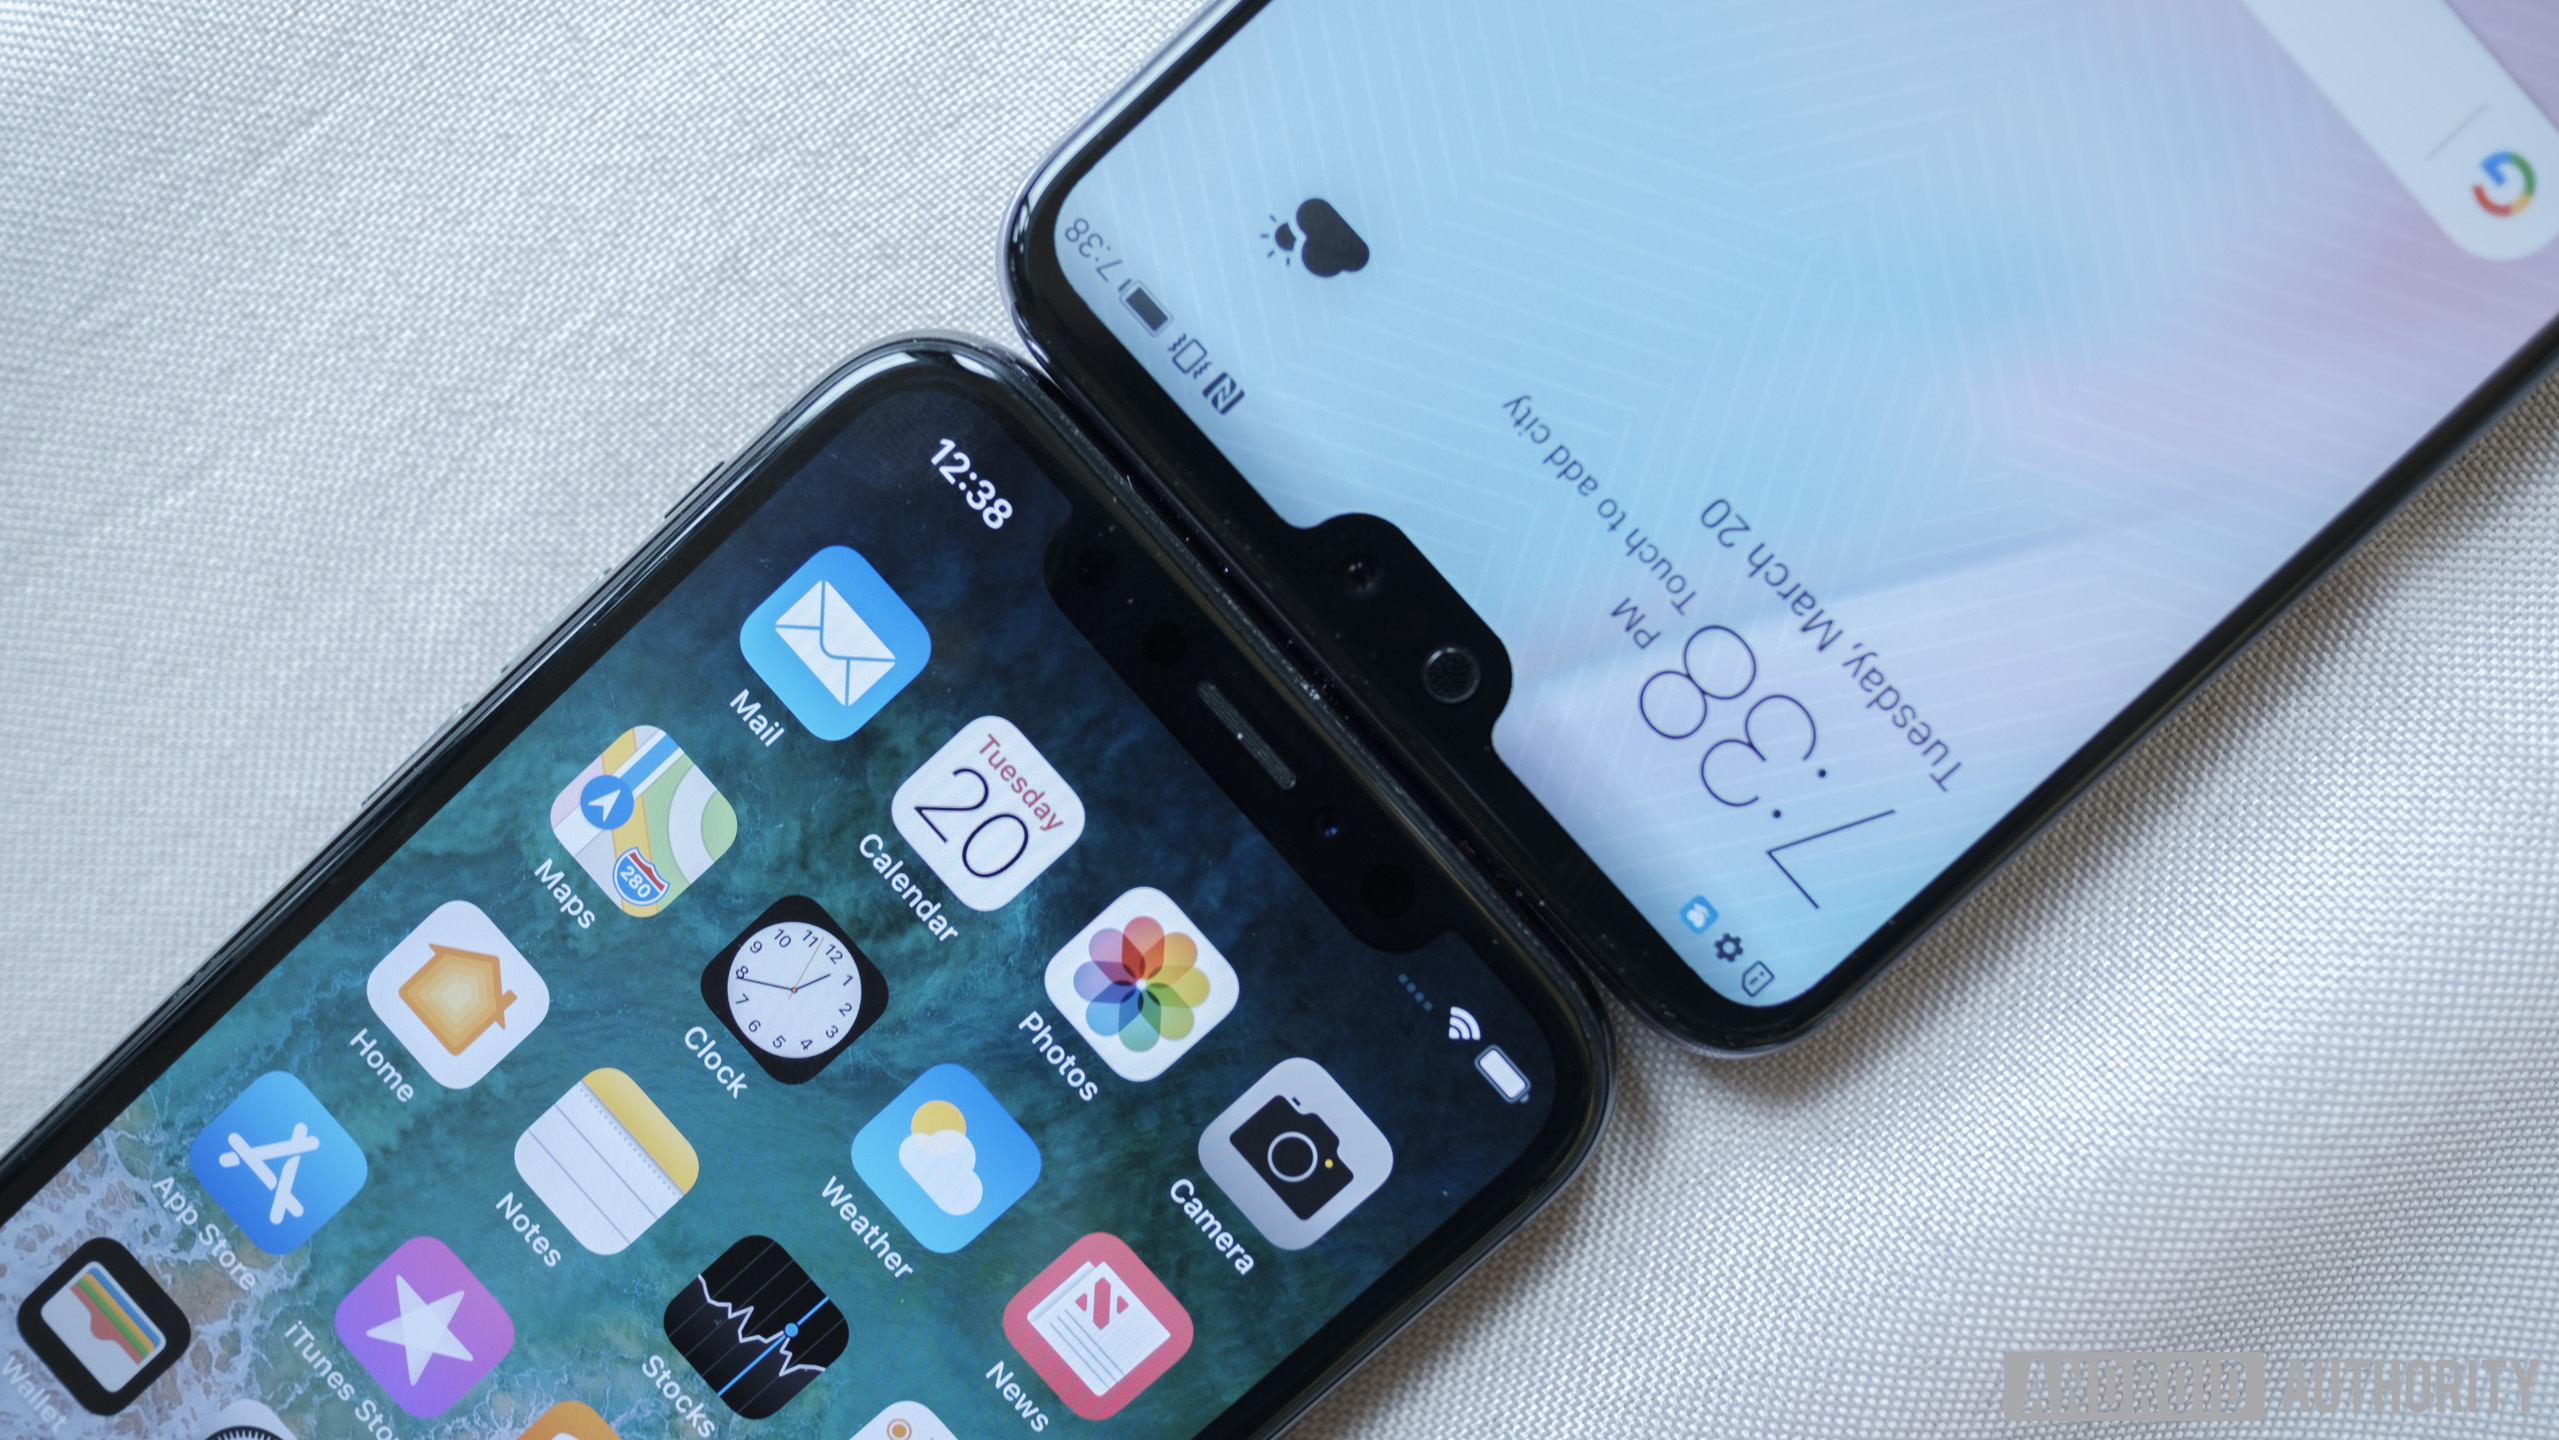 The Huawei p20 Pro and Apple iPhone X touching each other on a table.